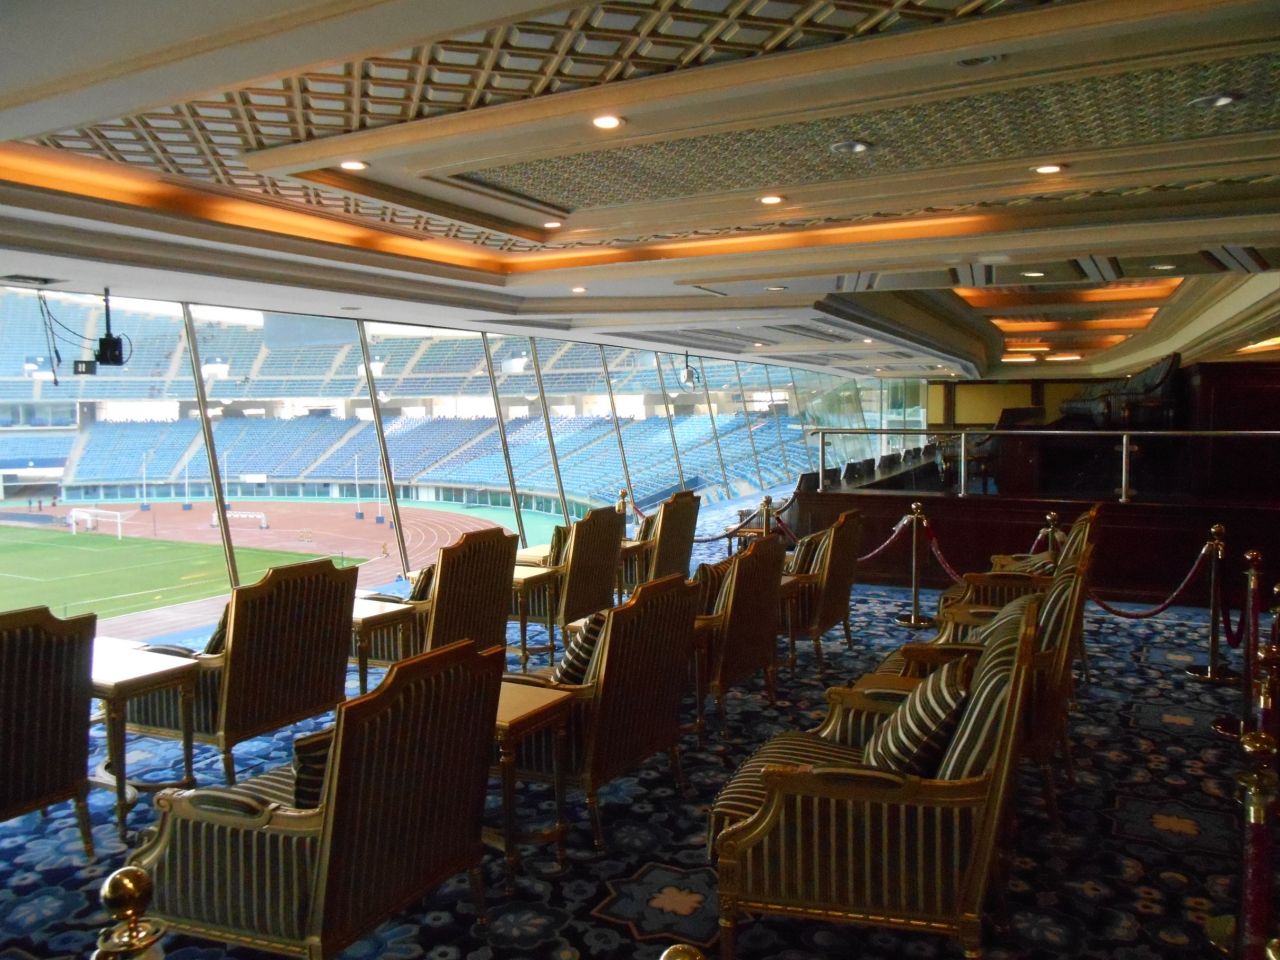 Forget VIPs -- the Jaber Al-Ahmad International Stadium was built to cater for VVIPs. The arena's VVIP seating section, known as the Emir's Box, is modeled on the Directors' Box at Arsenal's Emirates Stadium.